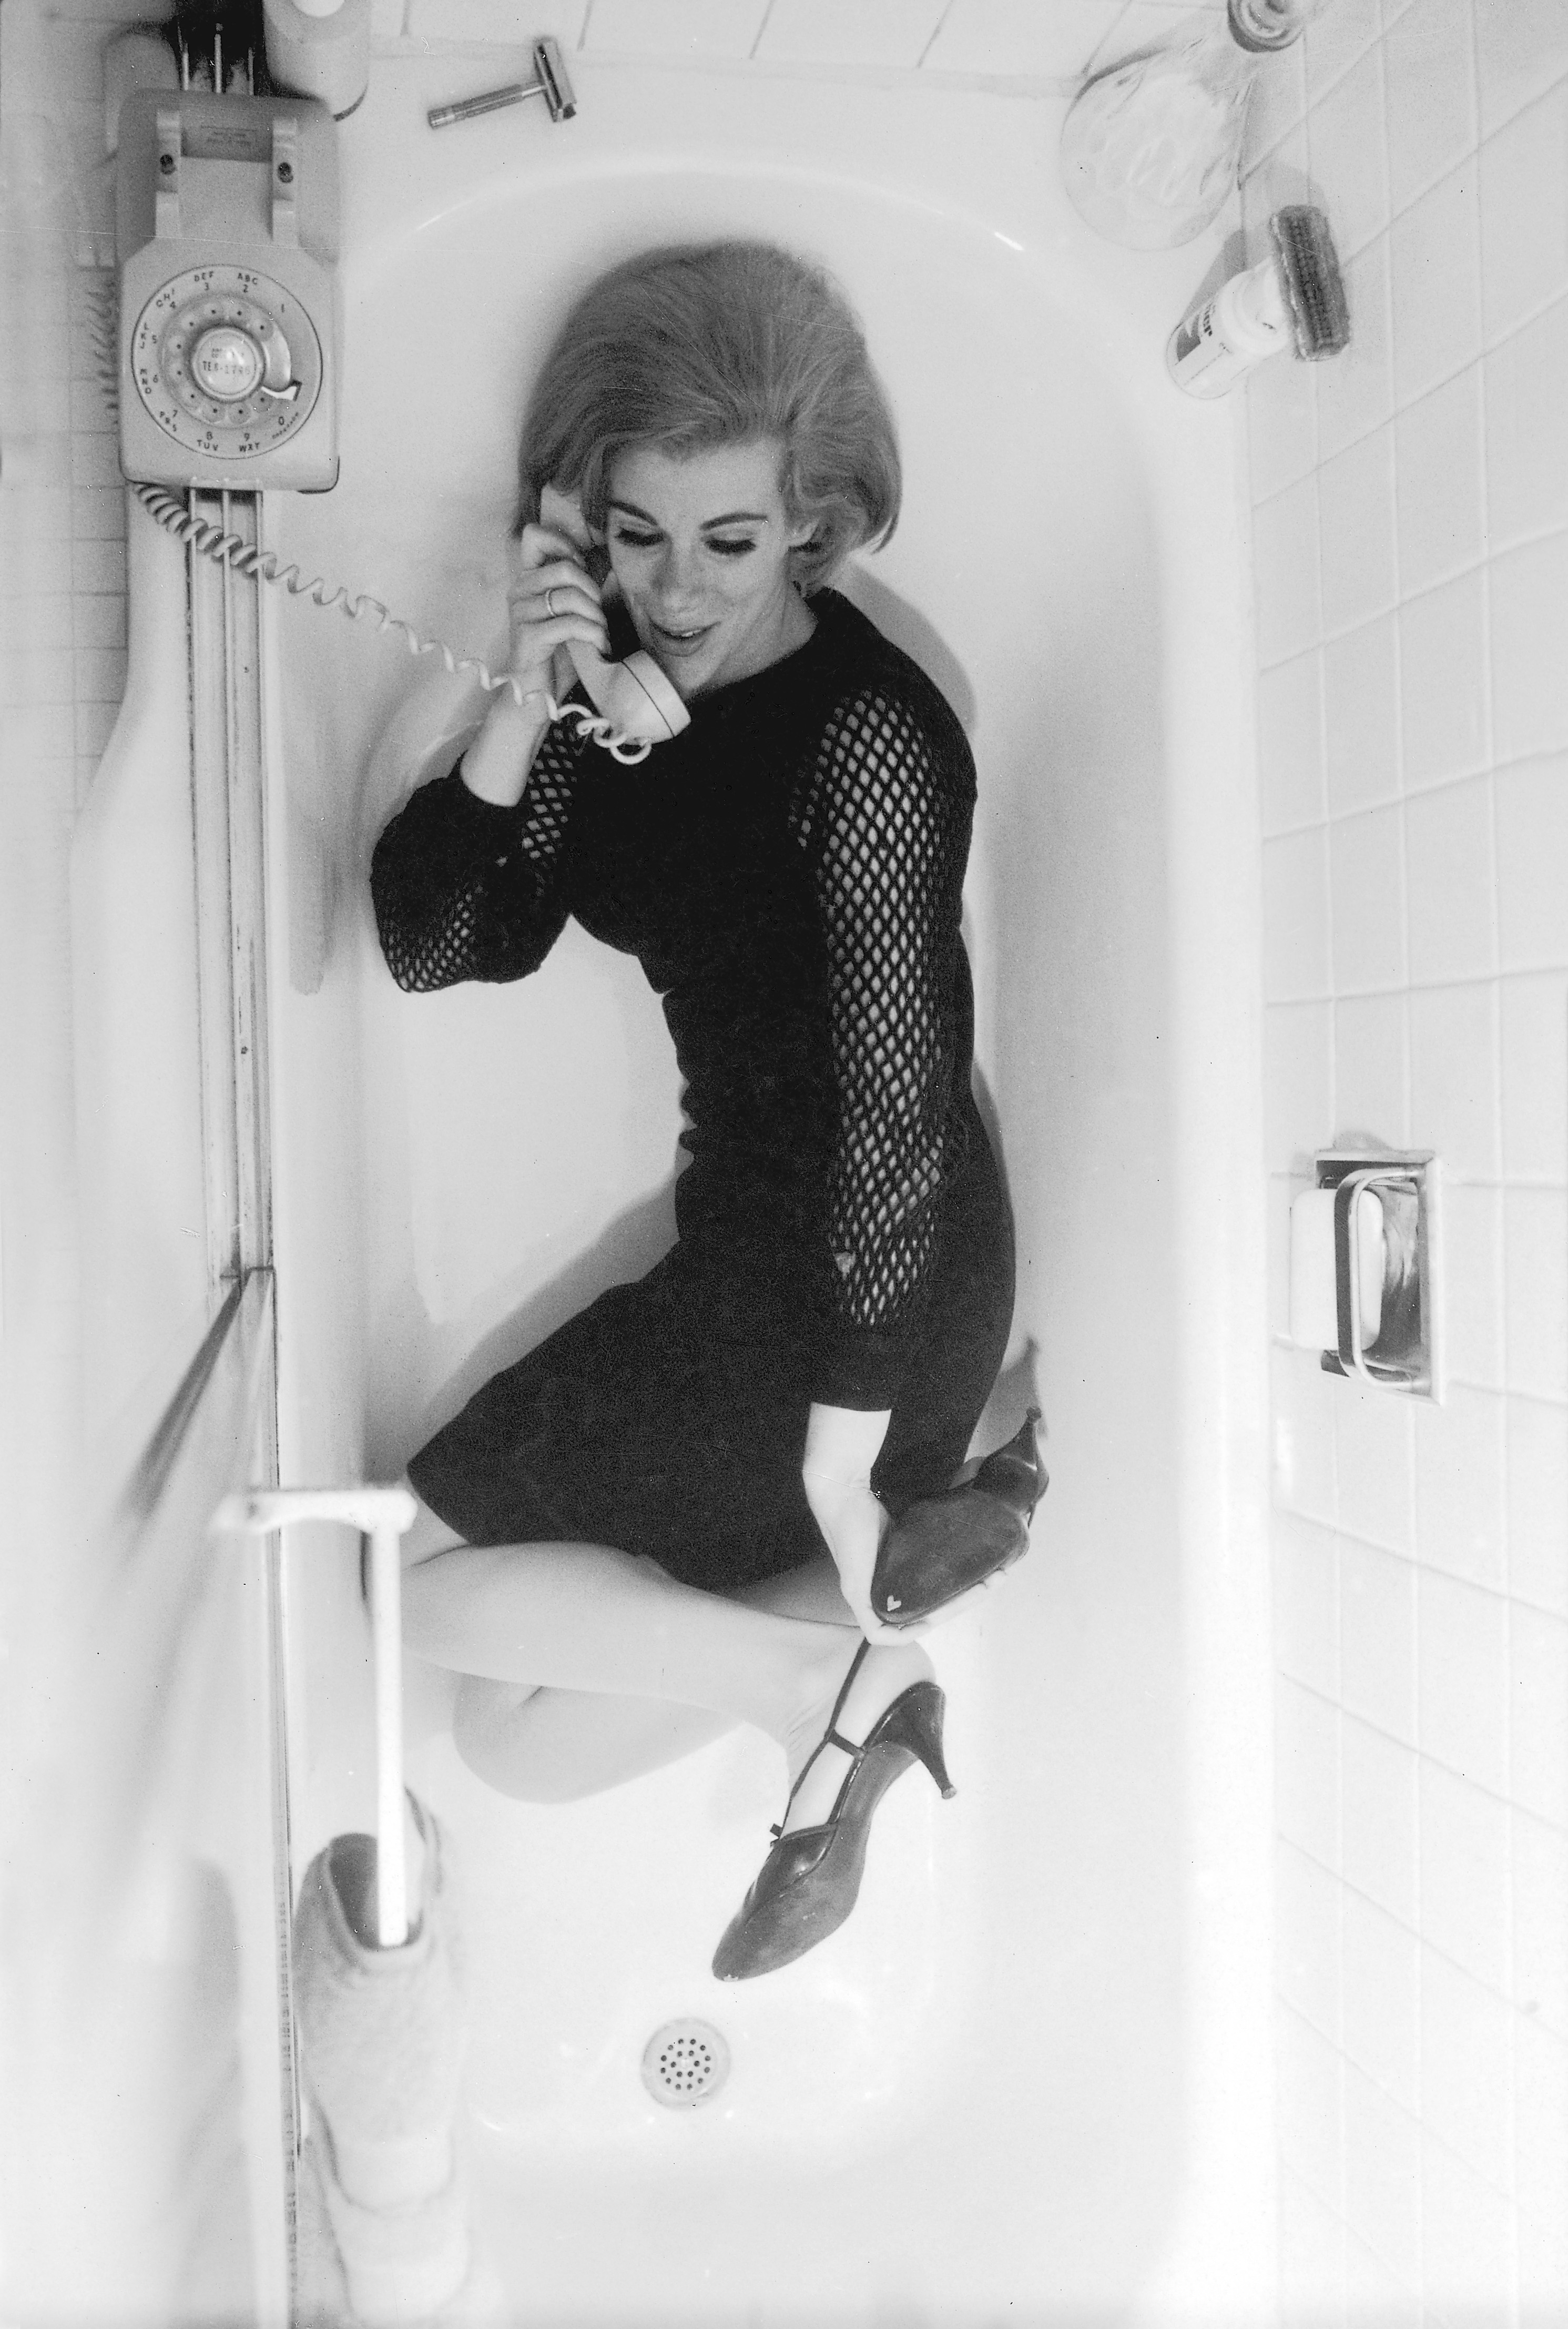 Comedienne Joan Rivers wearing black mesh dress and heels, while talking on the phone in a bathtub in New York City on March 1, 1966. (Truman Moore—The TIME & LIFE Picture Collection/Getty Images)